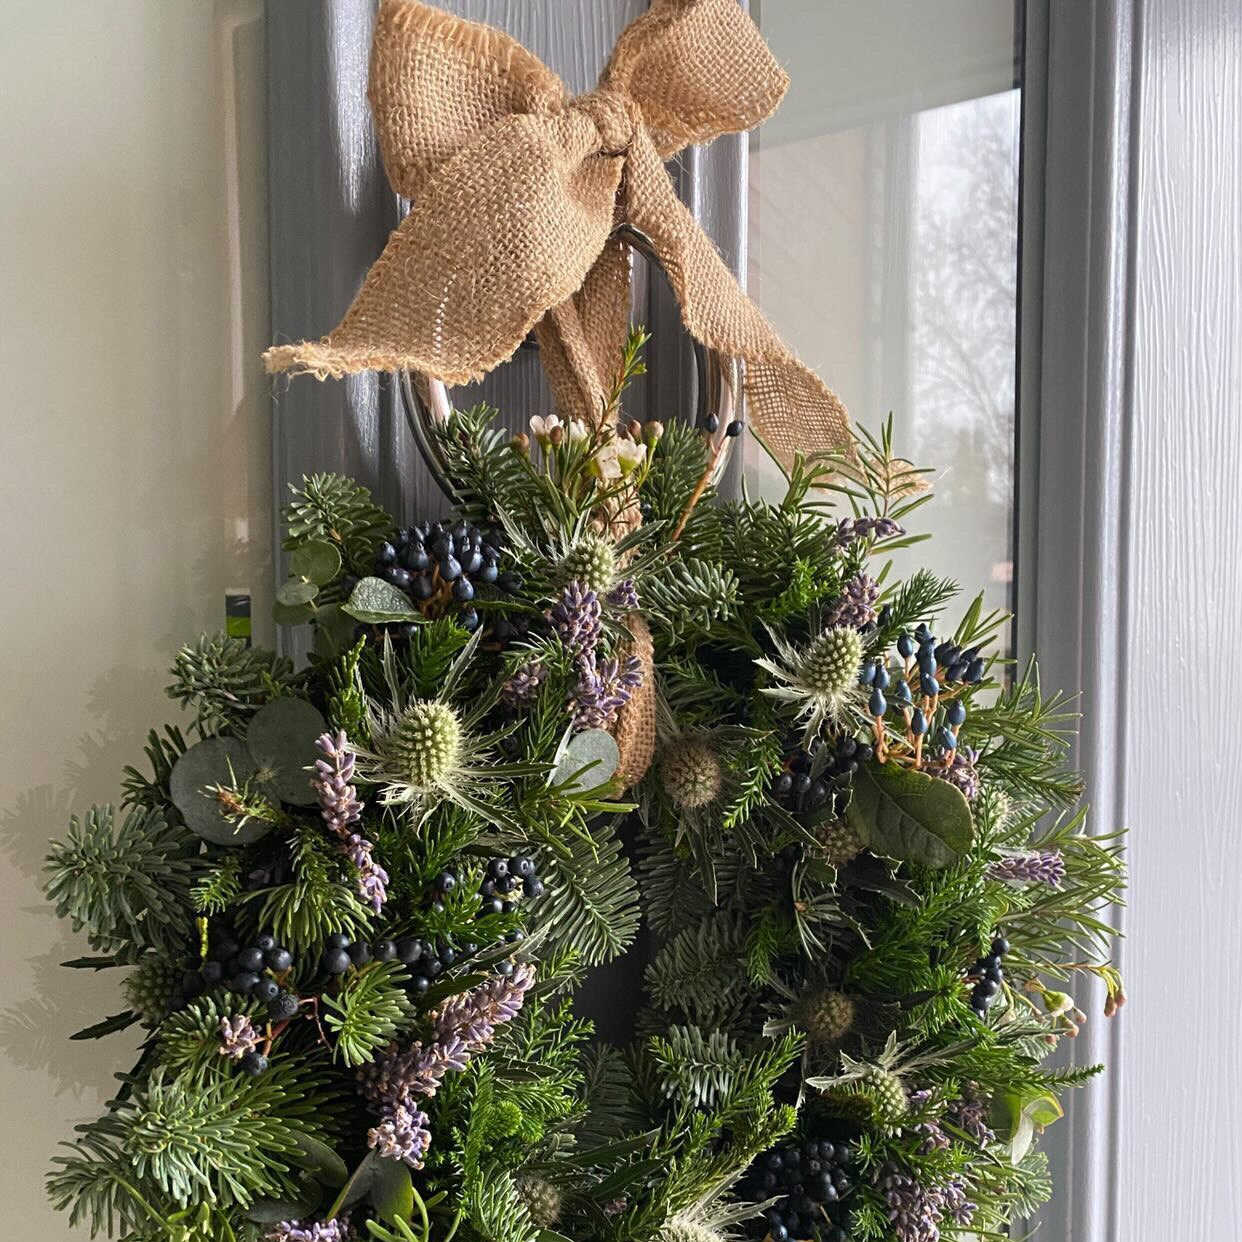 The History of Christmas Wreaths